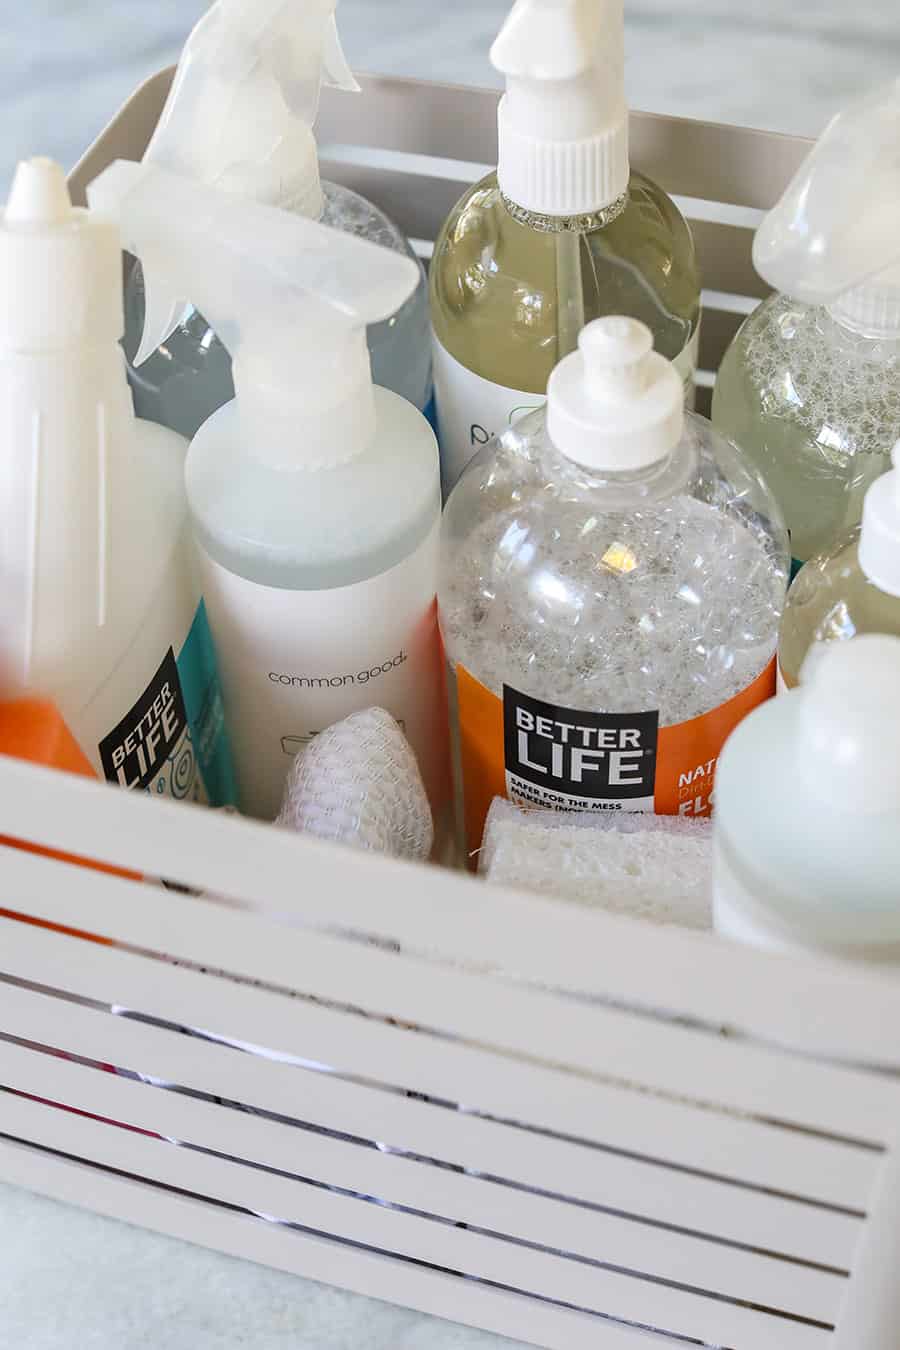 Natural cleaning products in a basket for a healthier cleaning kit.